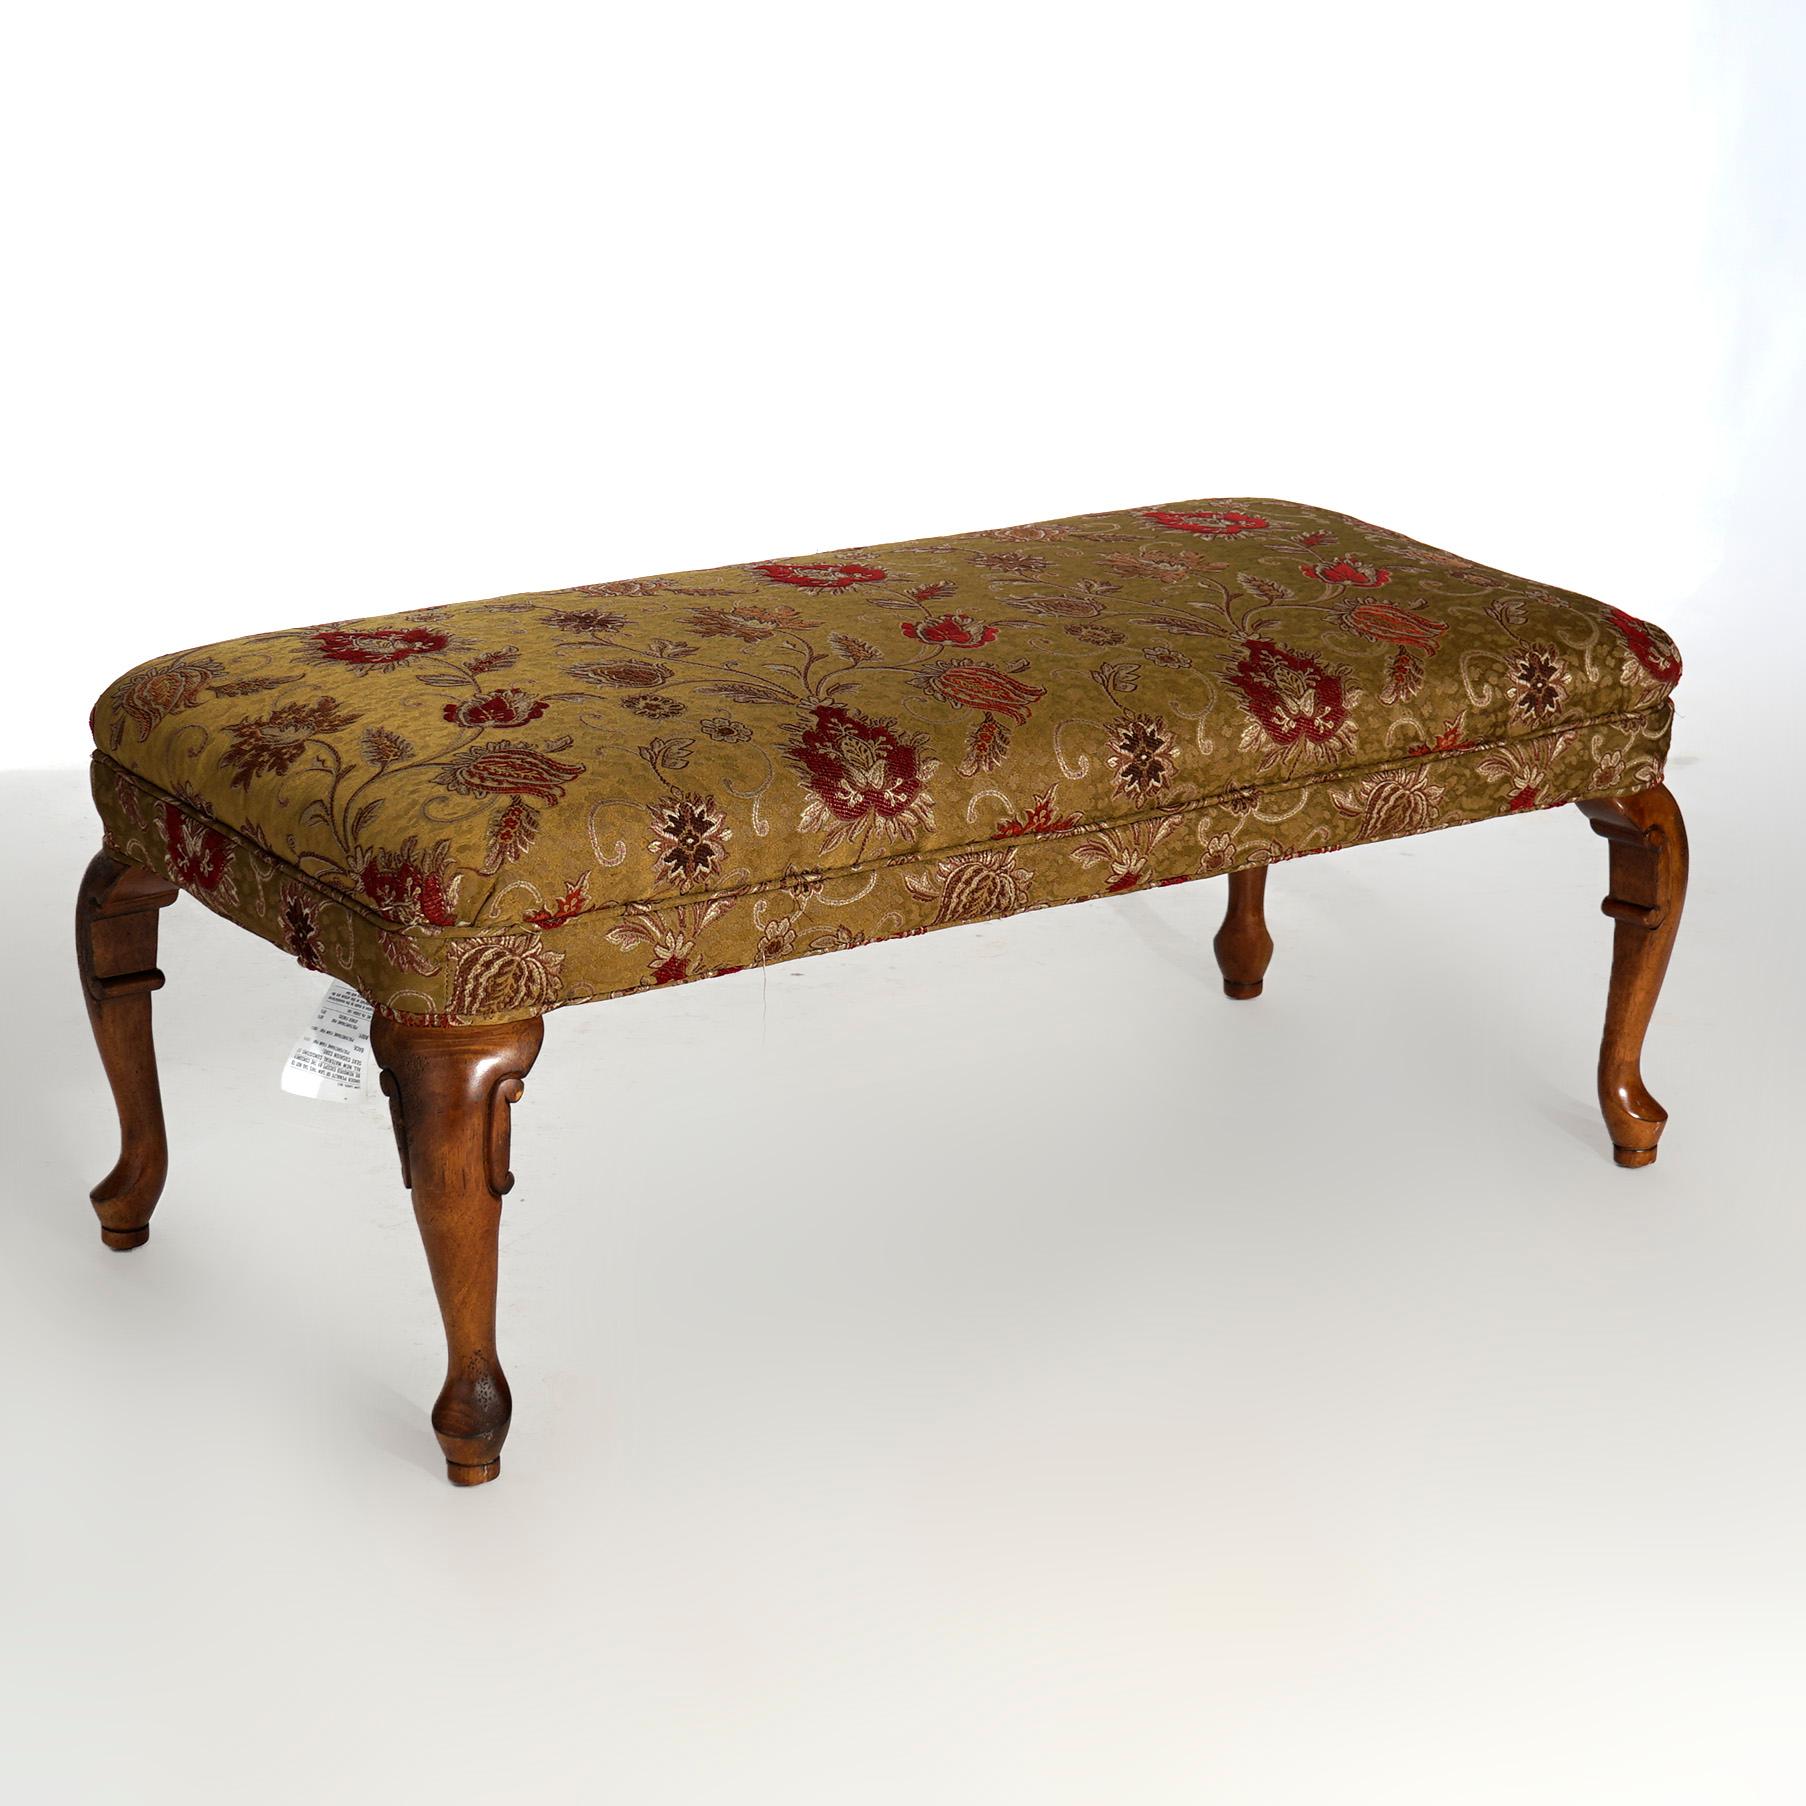 20th Century Queen Anne Style Upholstered Mahogany Long Bench 20th C For Sale